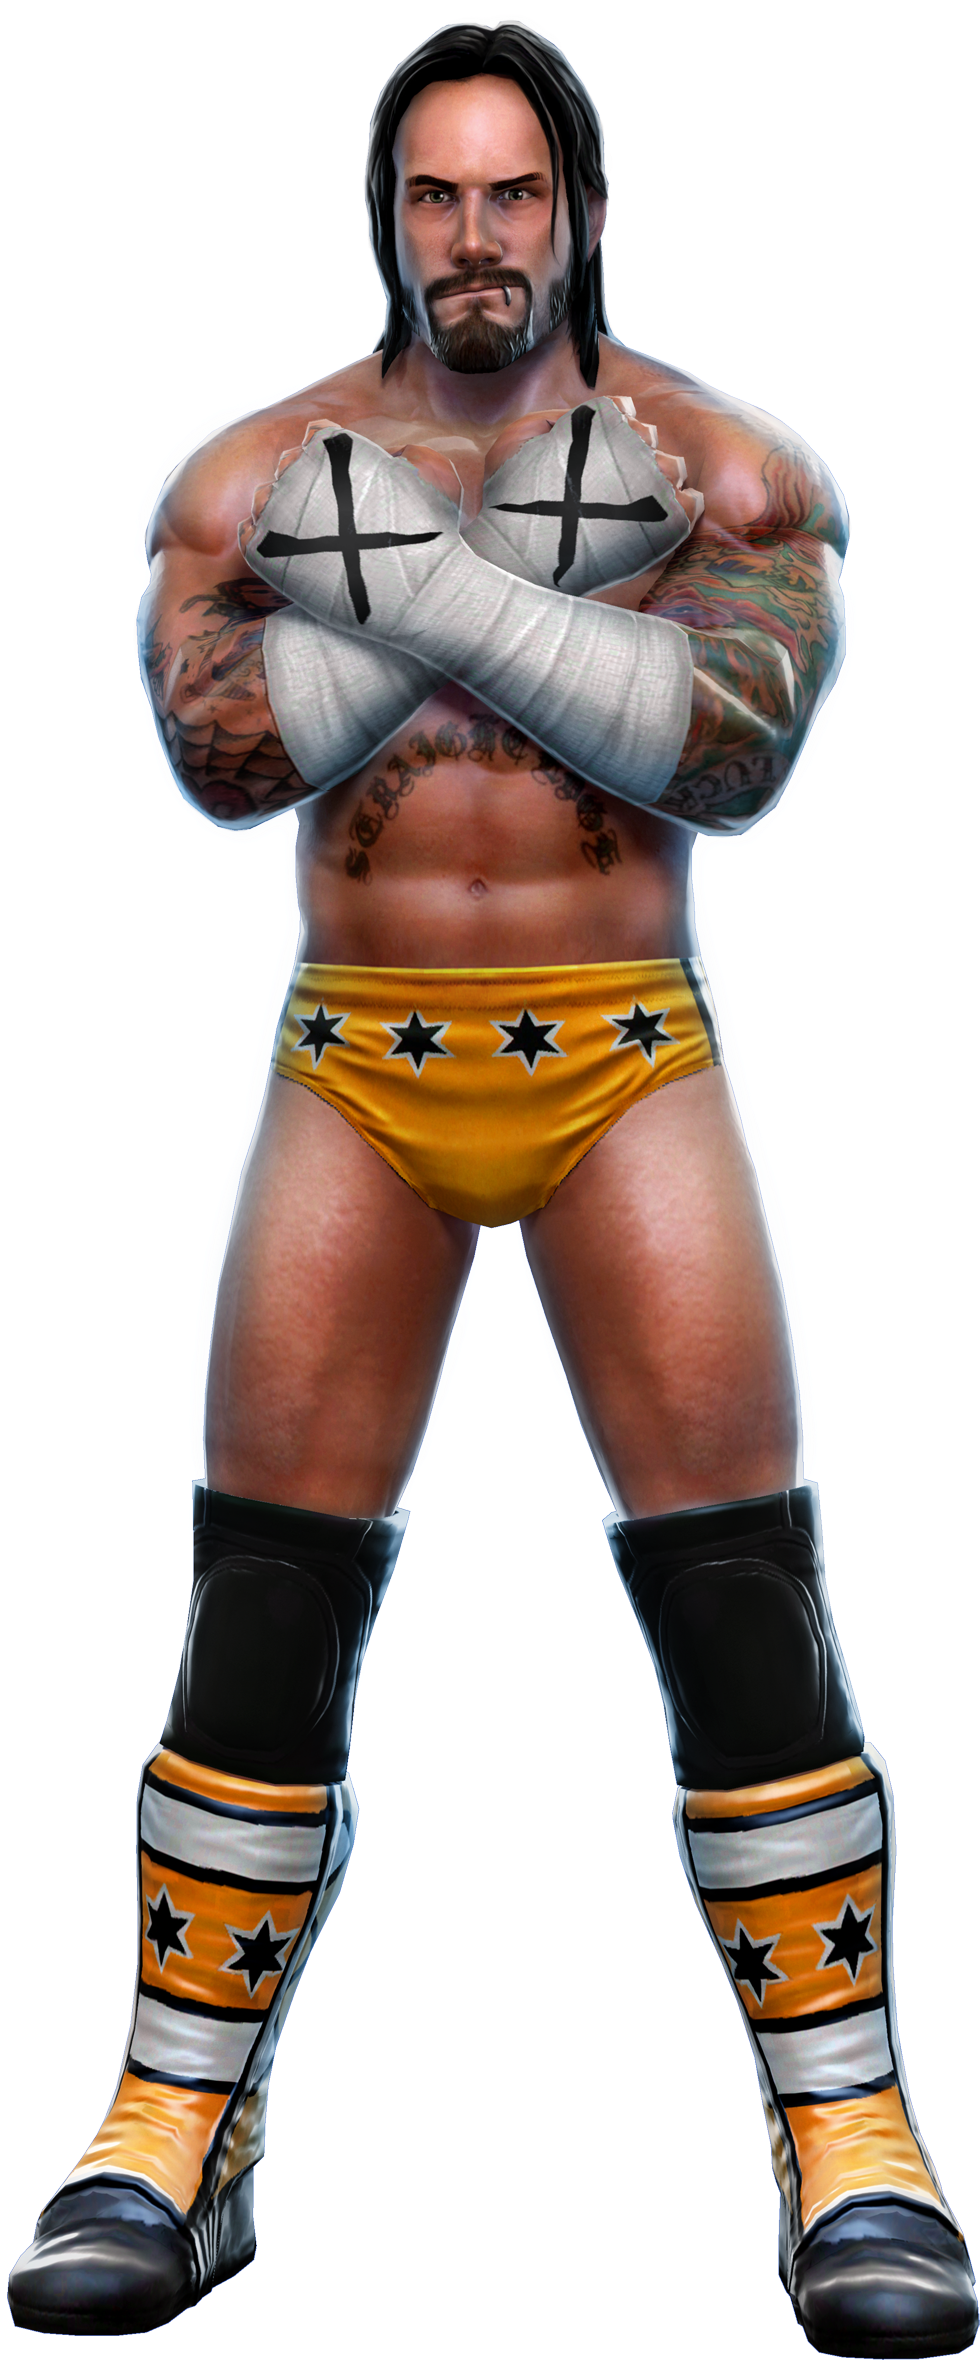 Wrestler_with_ Tattoos_and_ Star_ Trunks